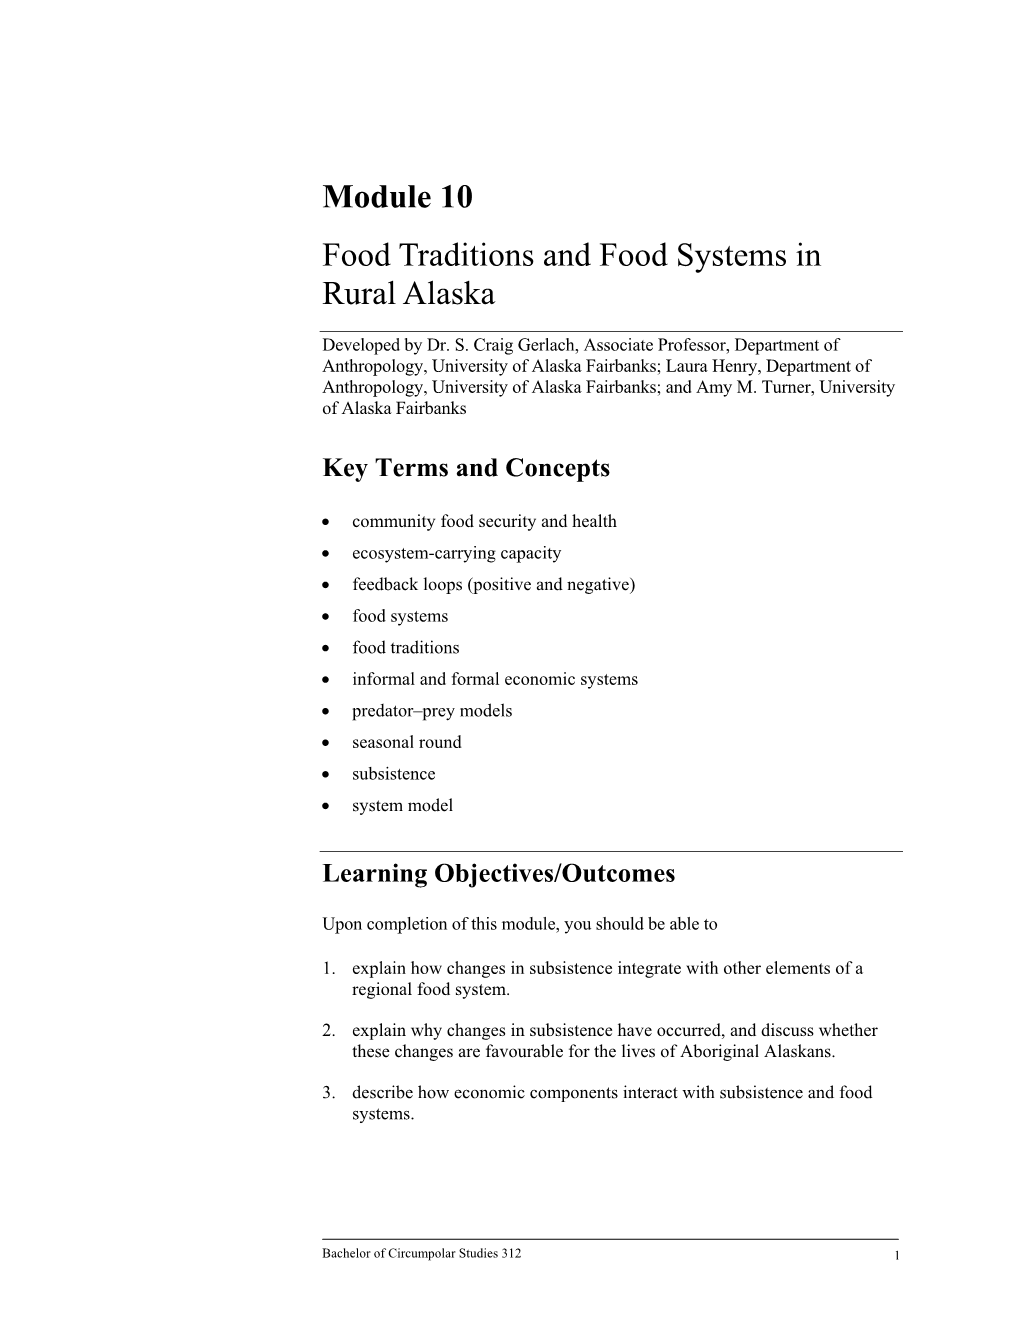 Module 10 Food Traditions and Food Systems in Rural Alaska